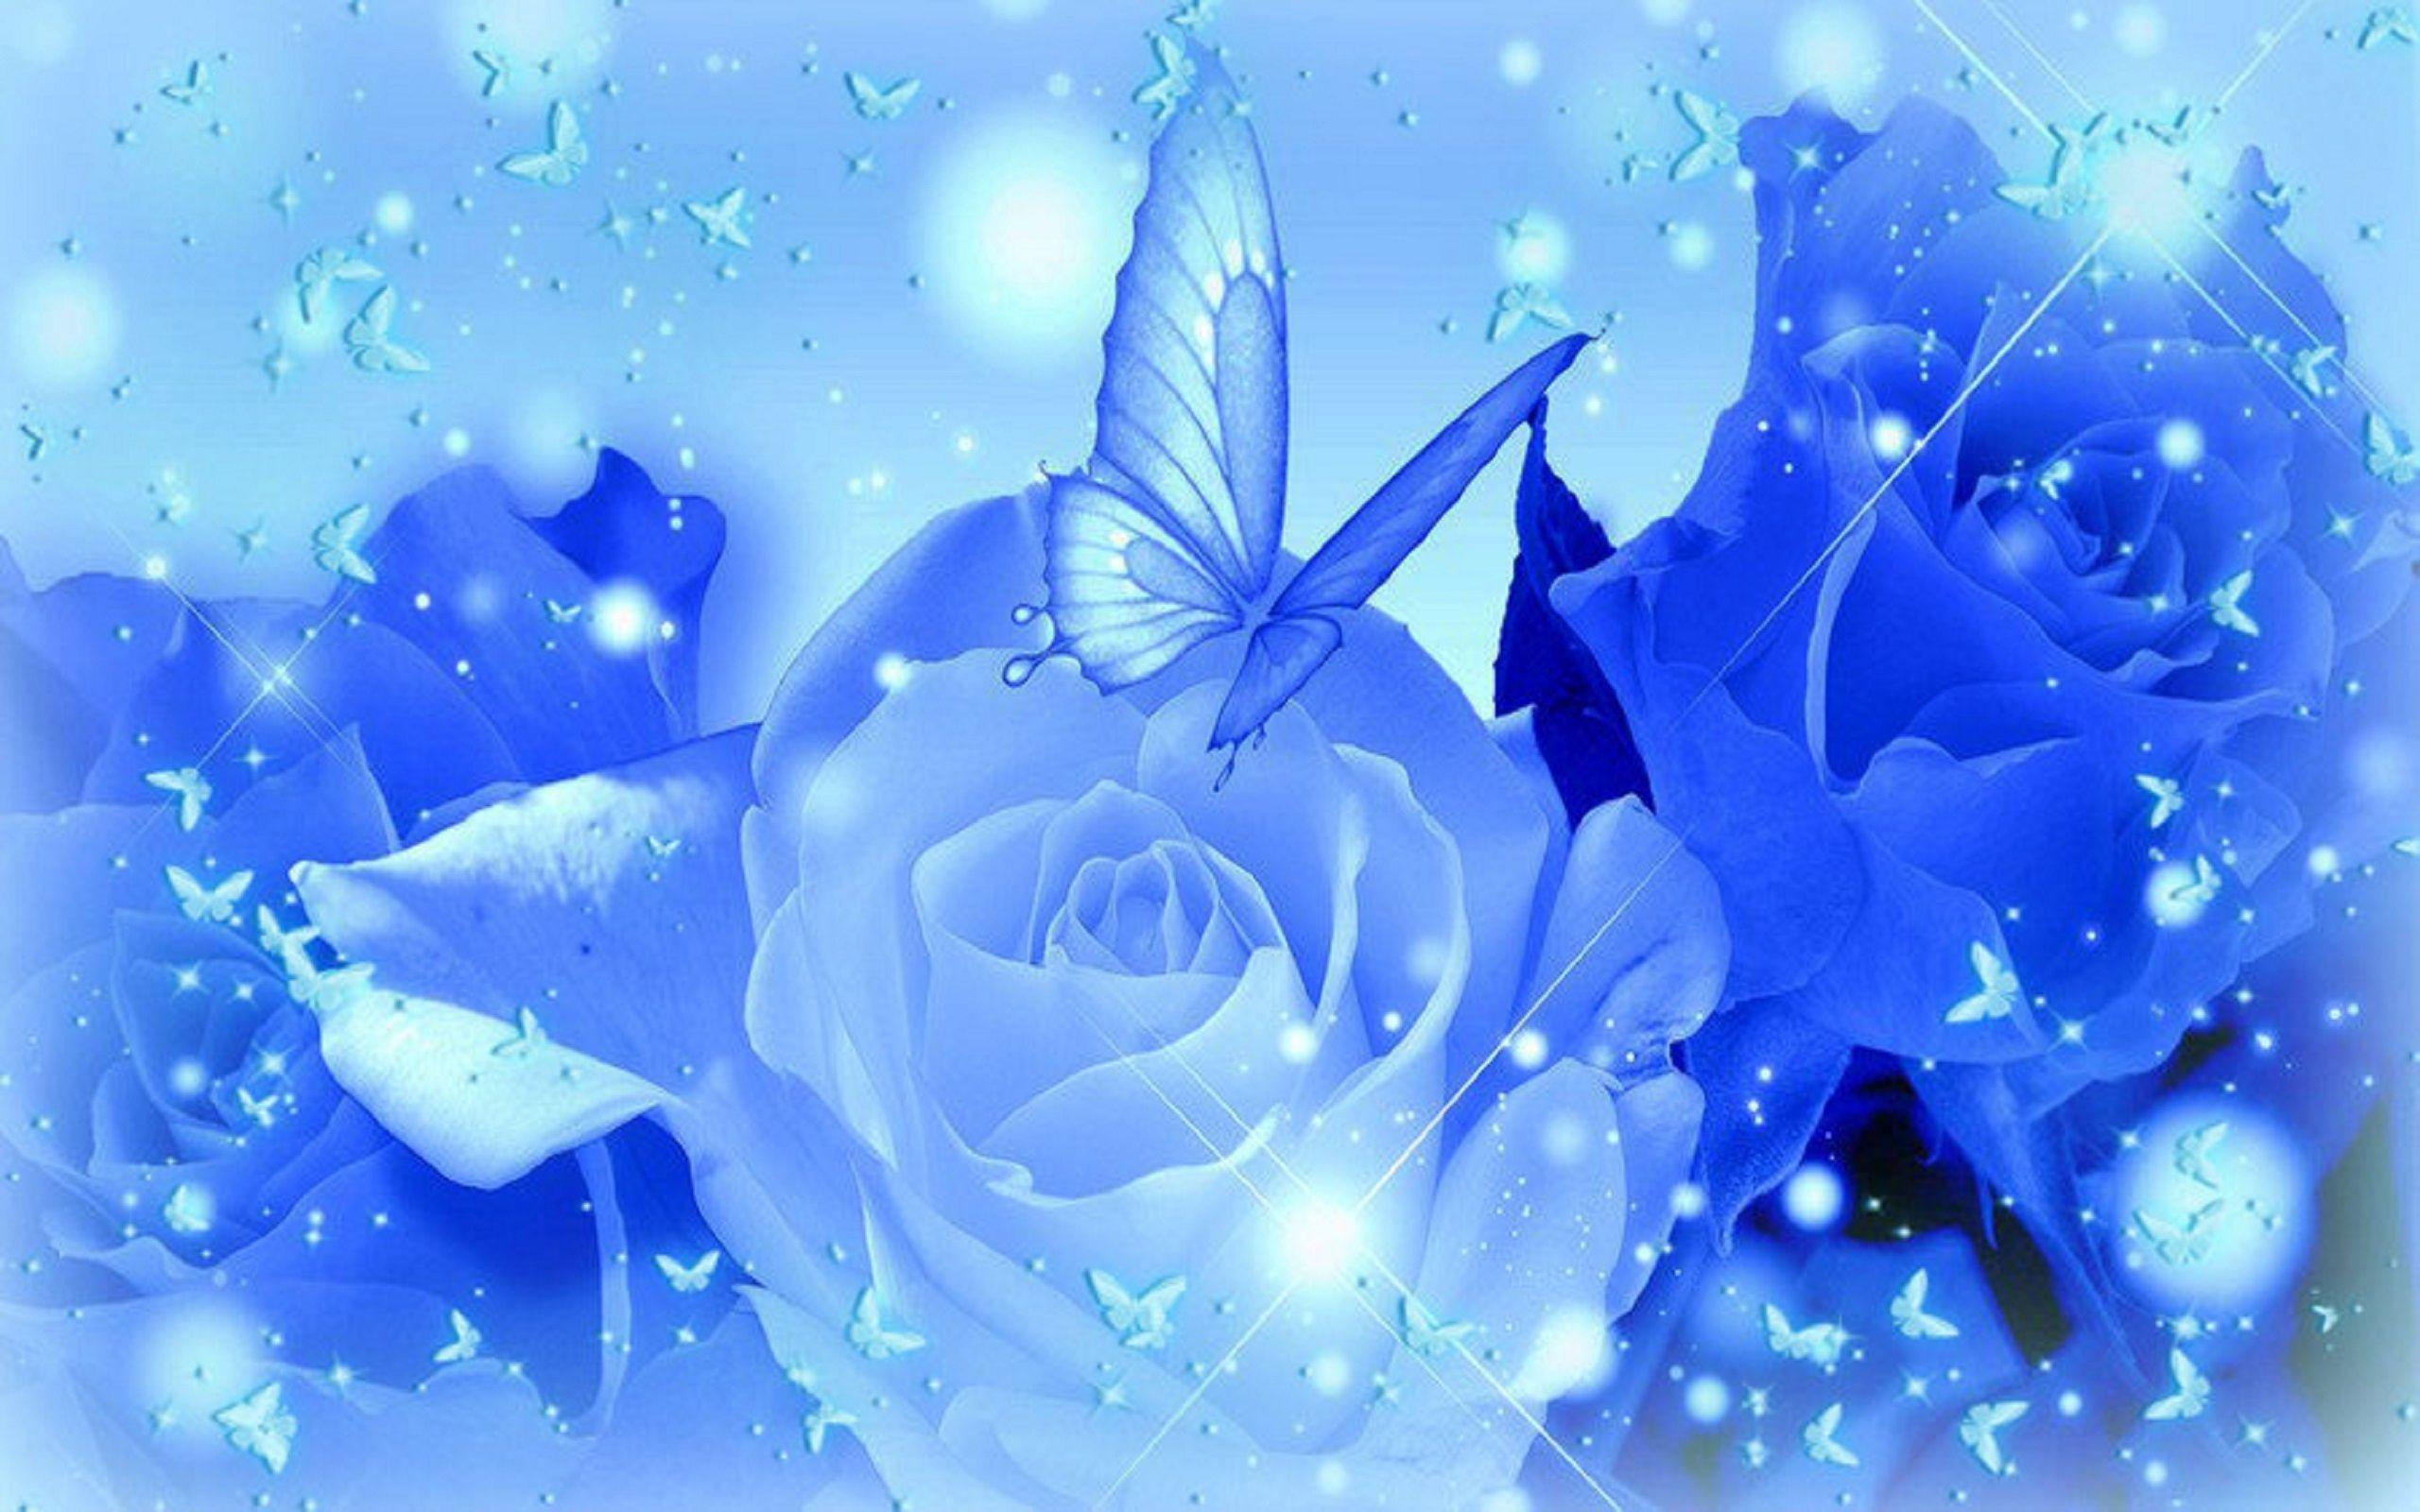 Blue Roses Backgrounds - Wallpaper Cave